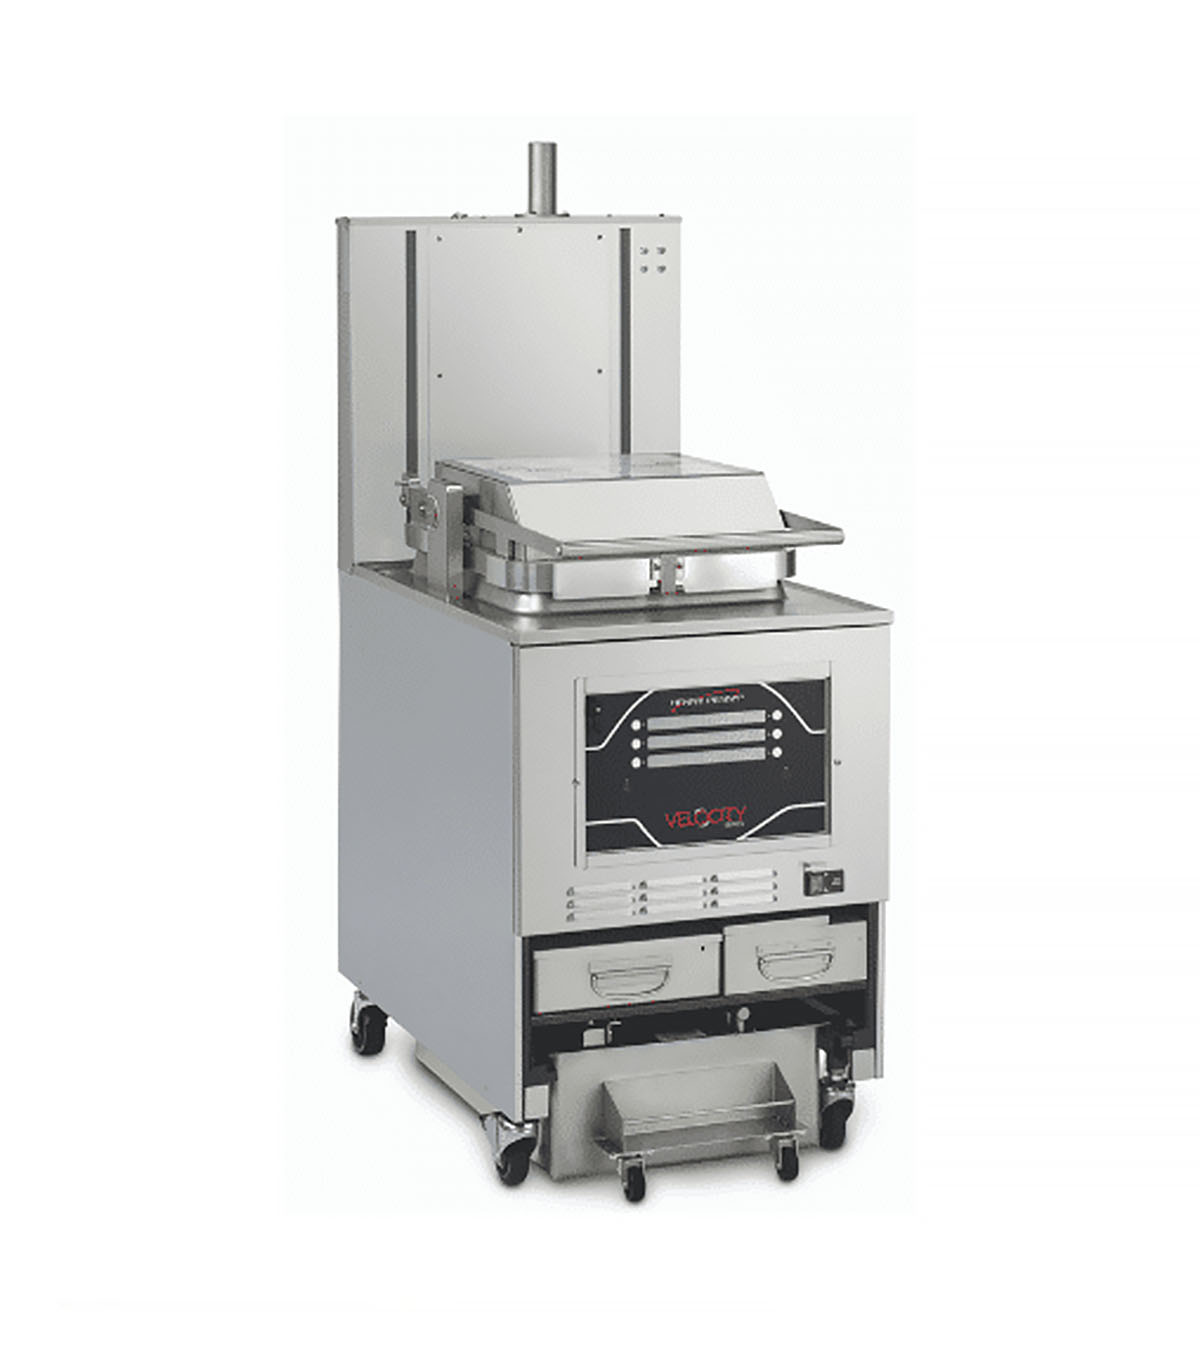 Henny Penny PXE100 Velocity Series Pressure Fryers